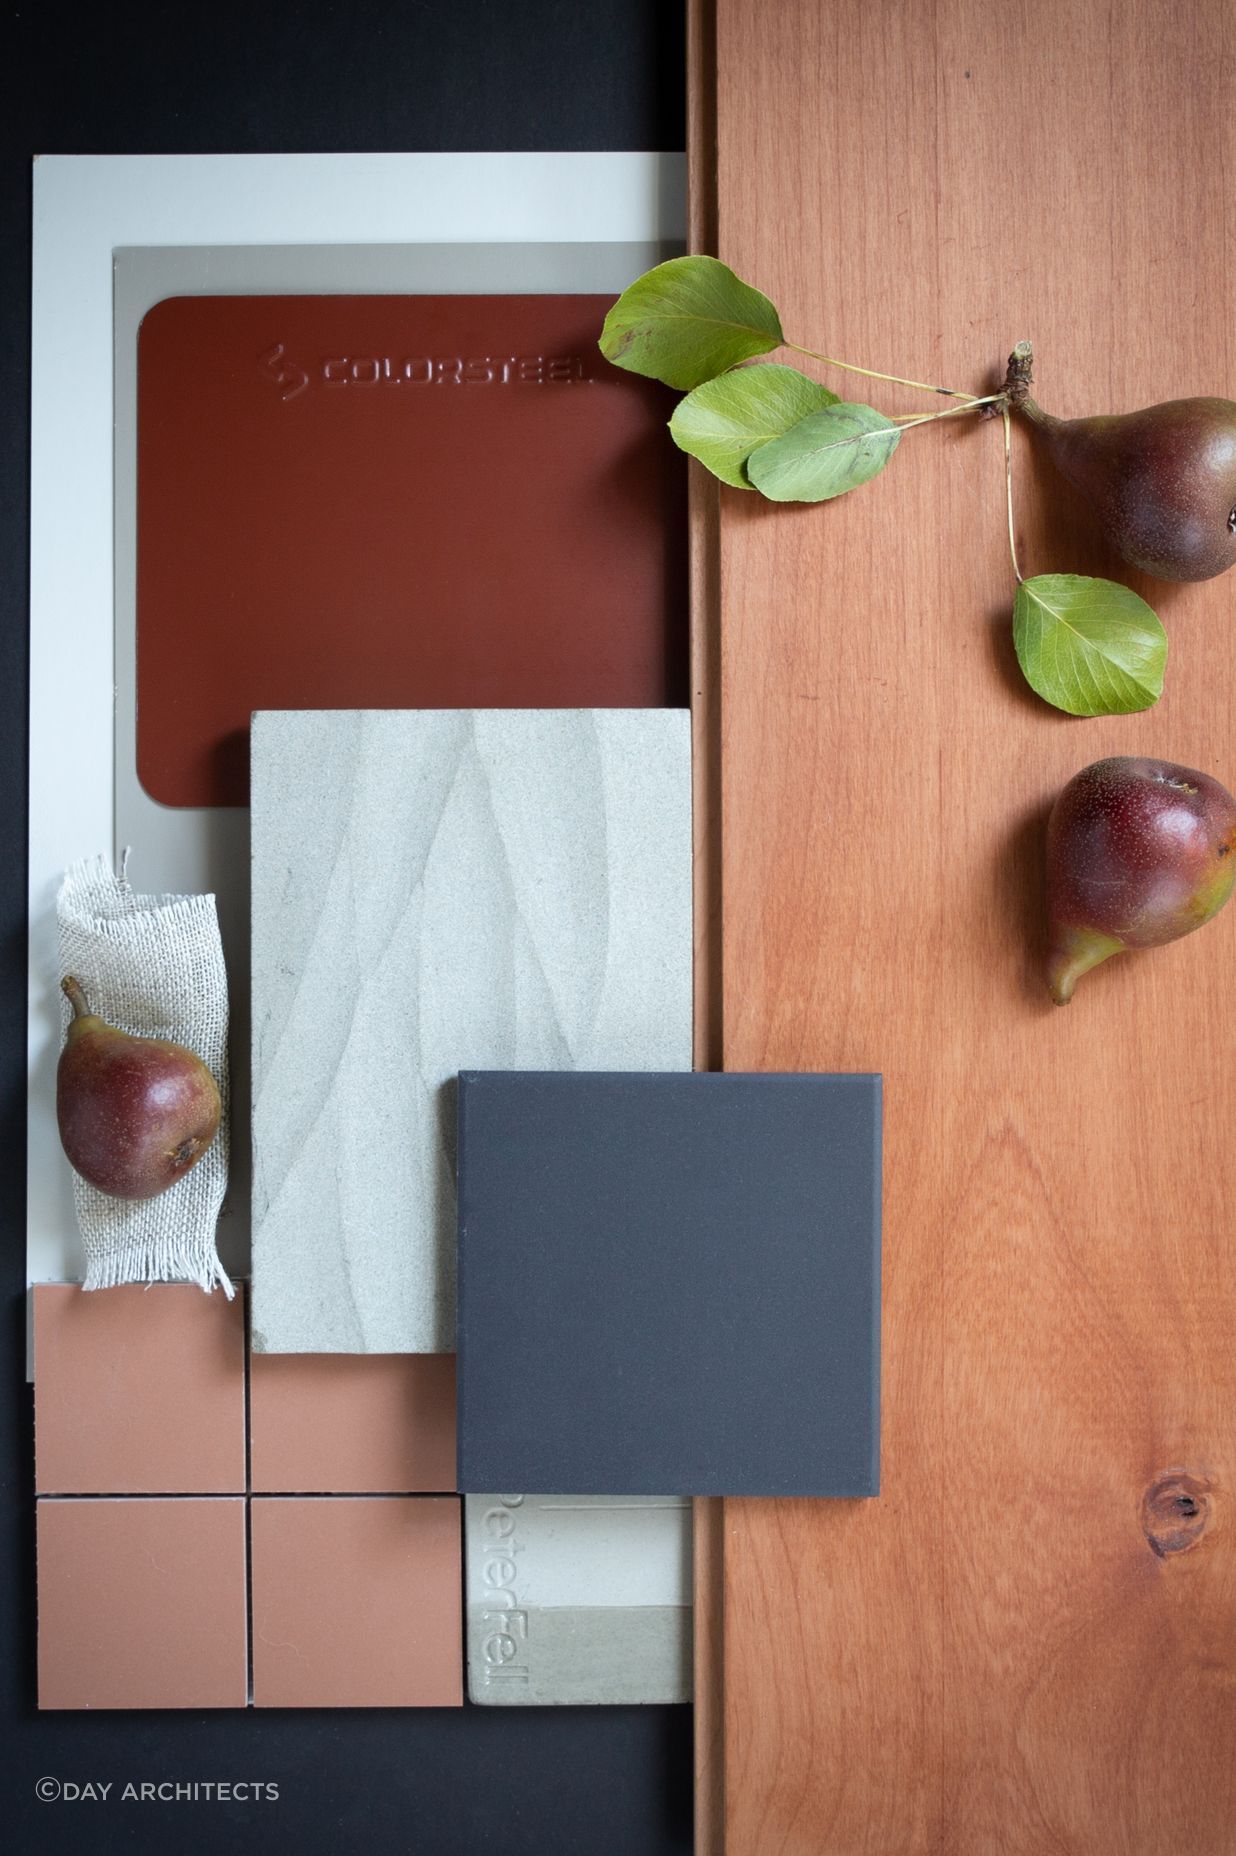 Colour: Scoria’s warmth is paired with NZ South Island Cherry beech. This palette is designed with the farmhouse in mind, an orchard outside and earth damp from the rain. Warm modern finishes are contrasted against light greys and natural linens. Combined with a farmhouse table and a bowl of freshly picked fruit and you have a home that feels right for its land.